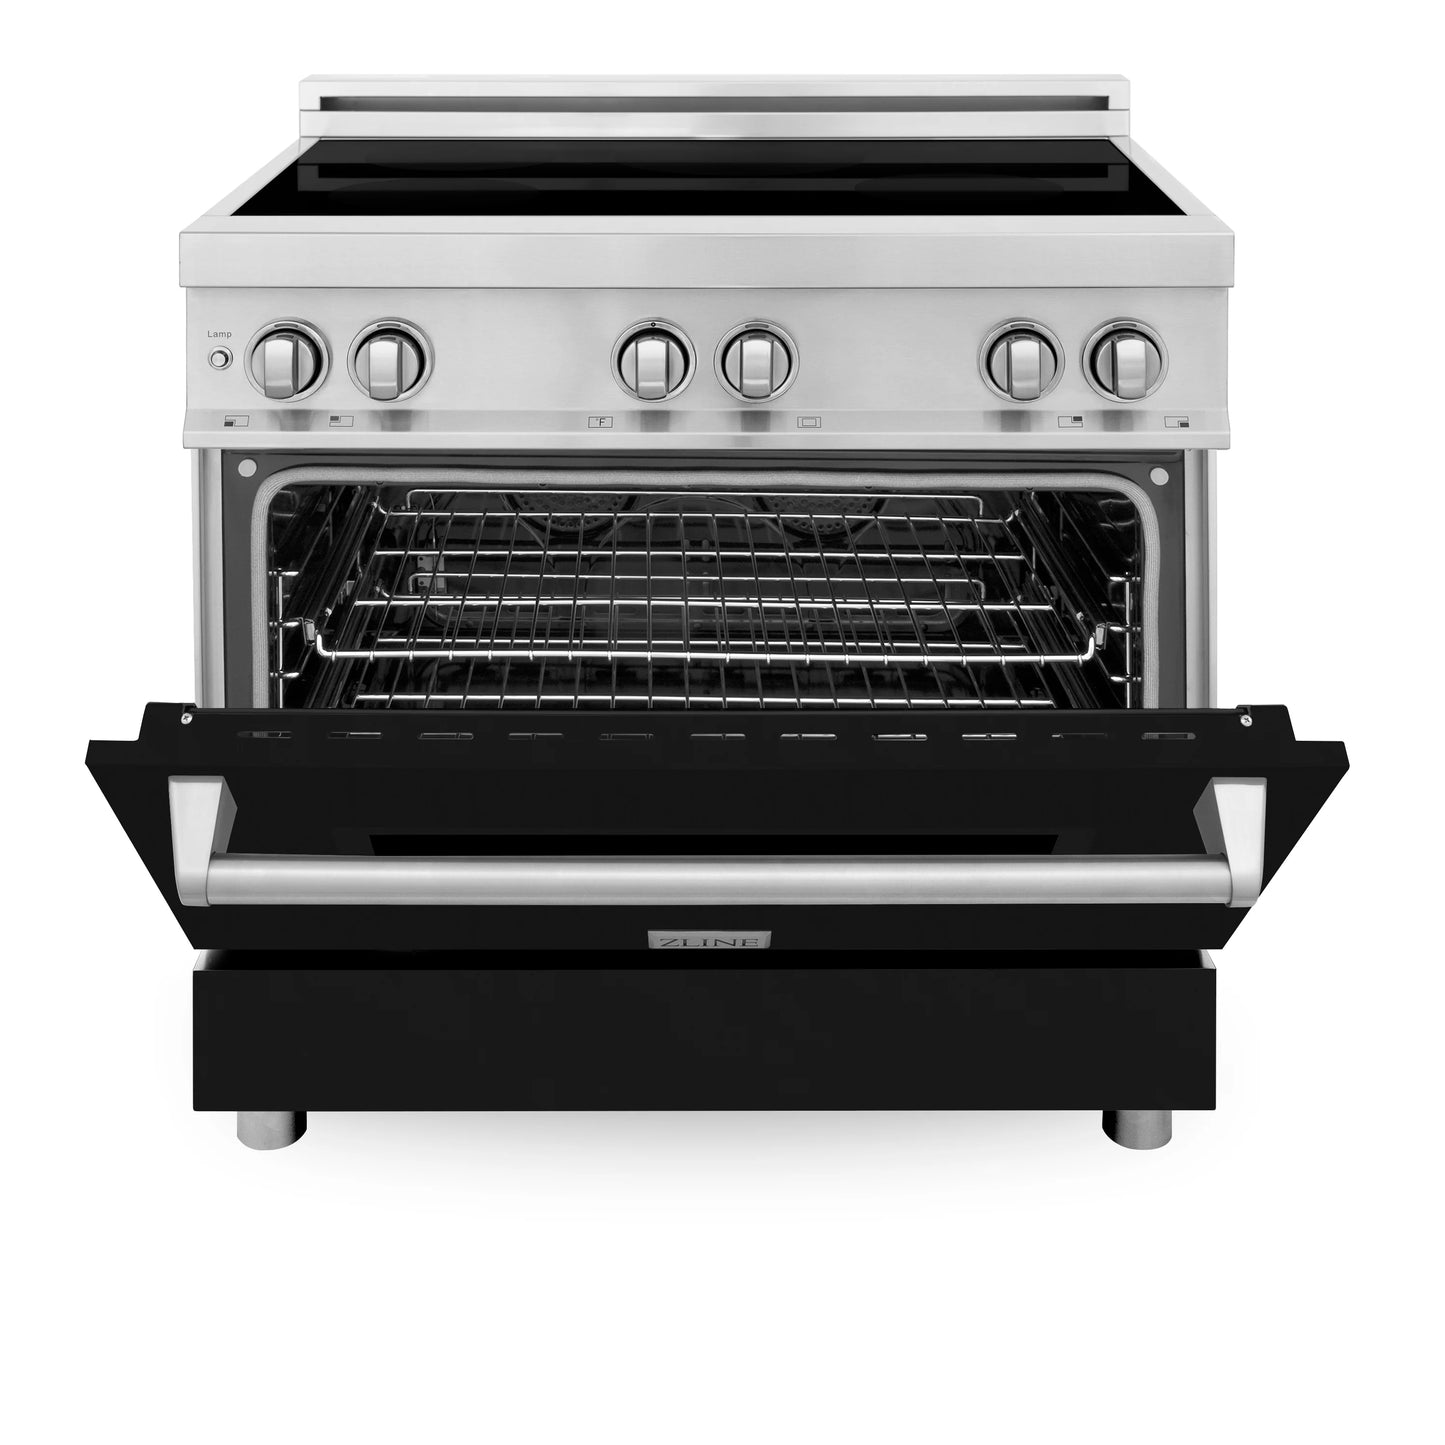 ZLINE 36 in. Induction Range with a 4 Induction Element Stove and Electric Oven in Stainless Steel with Black Matte Door (RAIND-BLM-36)